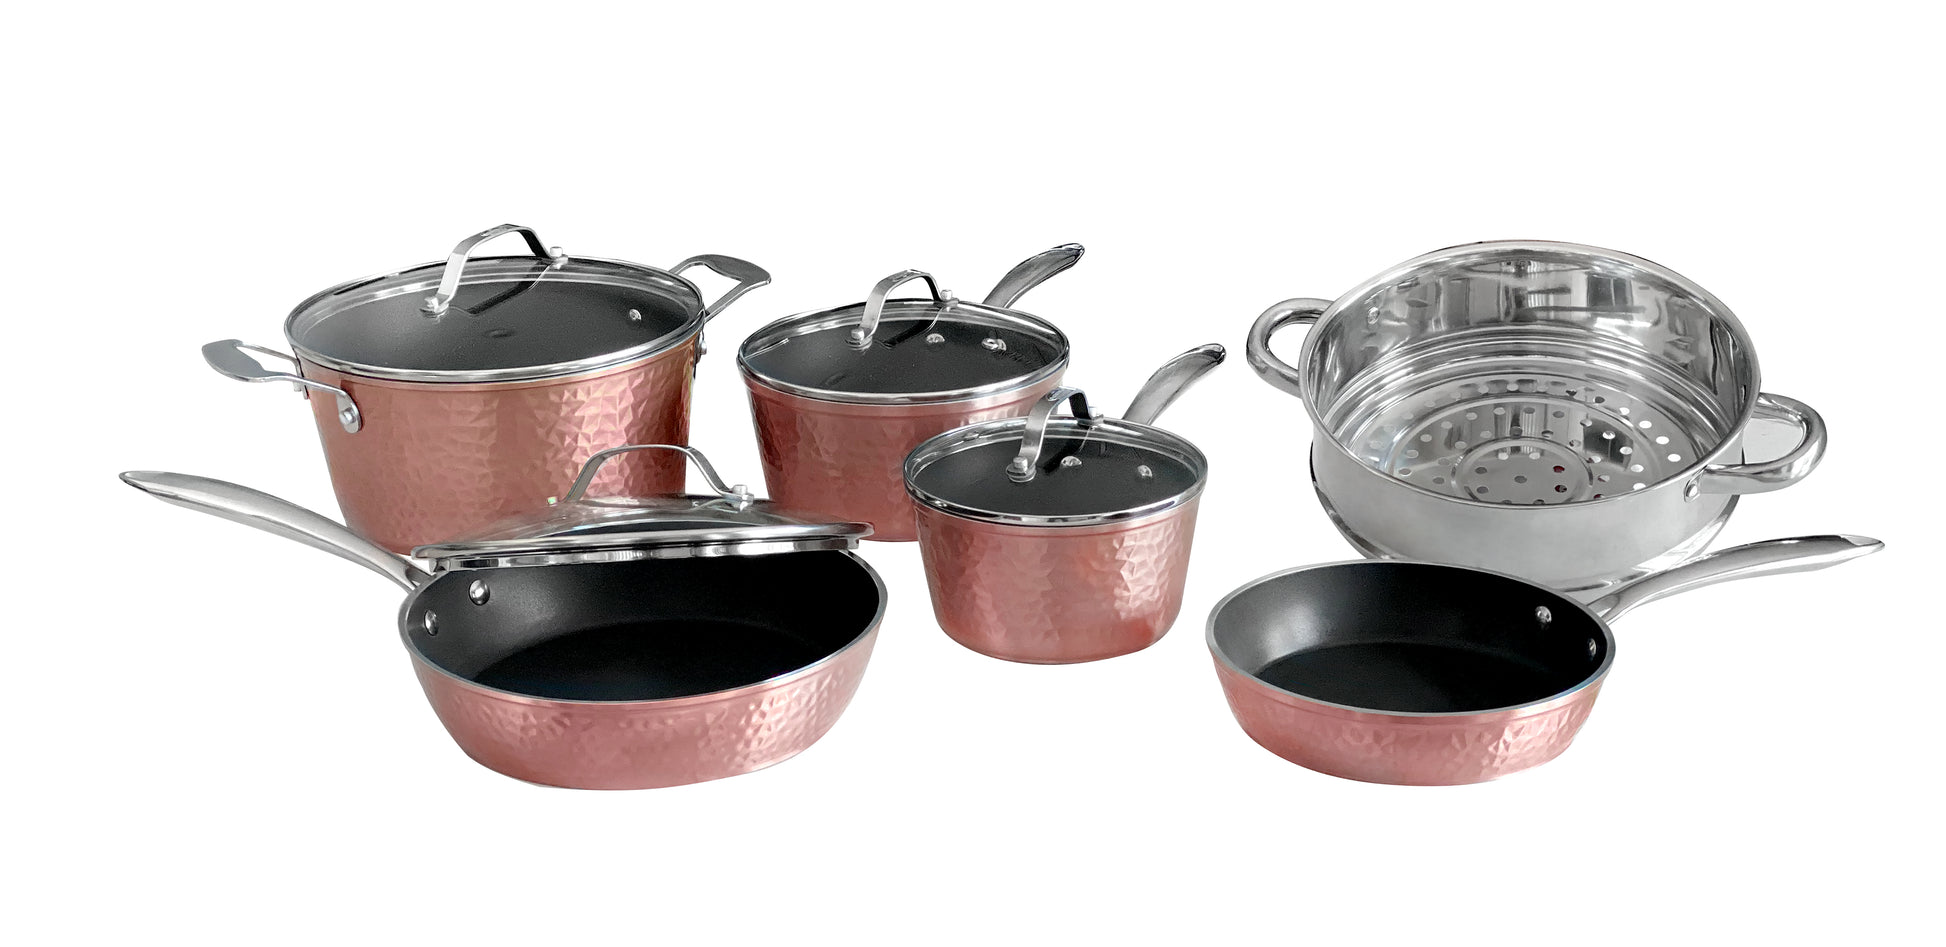 12 Pieces Hammered Cookware Set Granite Coated Nonstick Pots and